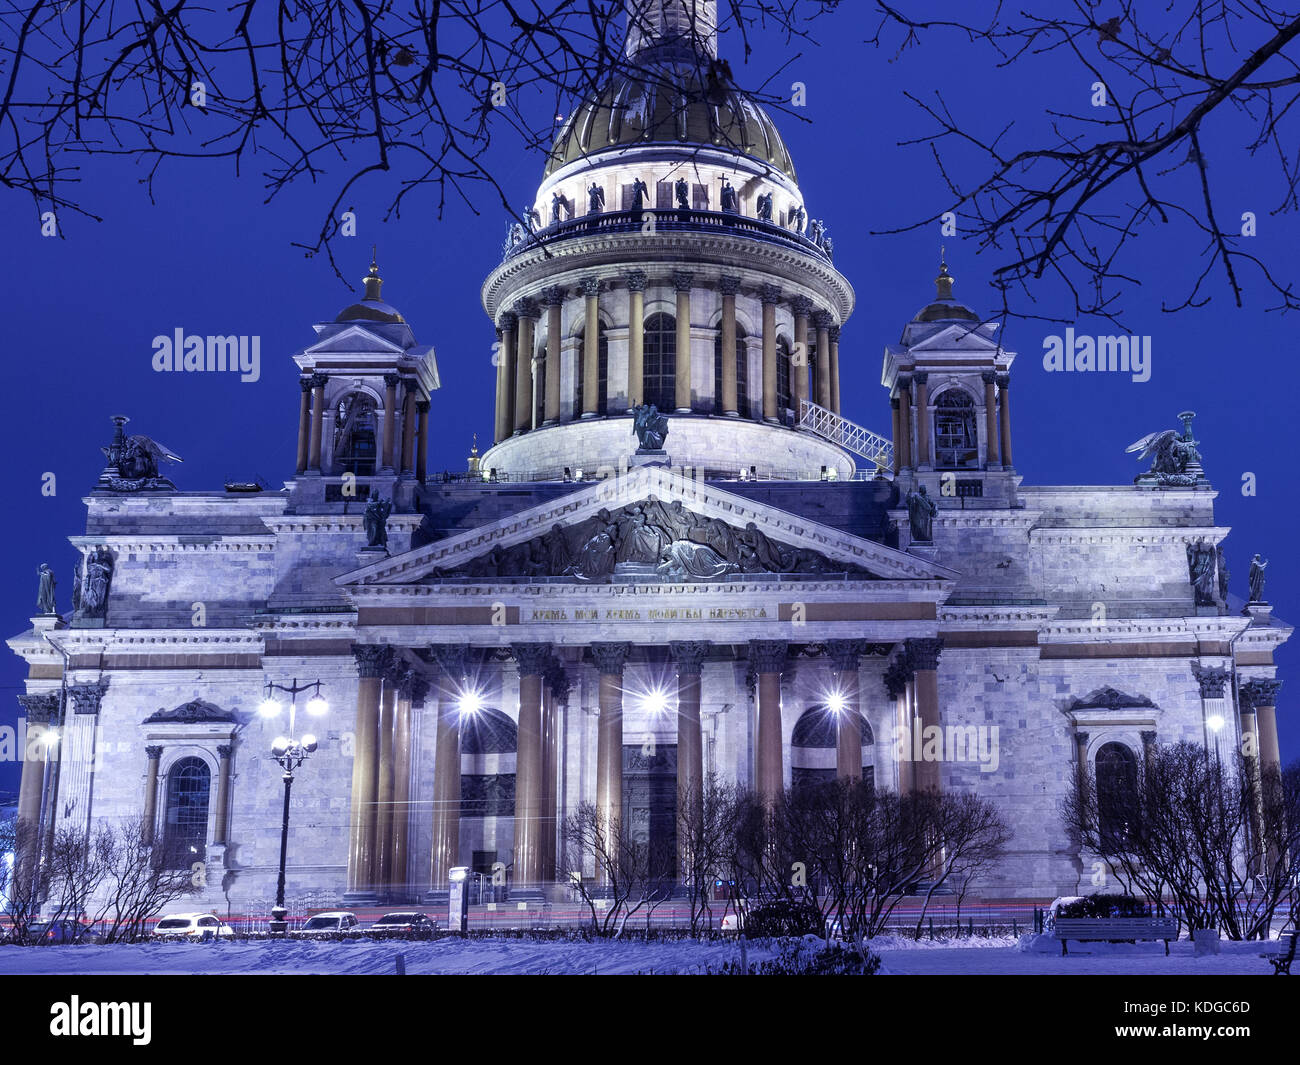 Old historical architecture landmark and touristic spot in Saint Petersburg, Russia: Saint Isaac's Cathedral by a winter night illuminated. Stock Photo